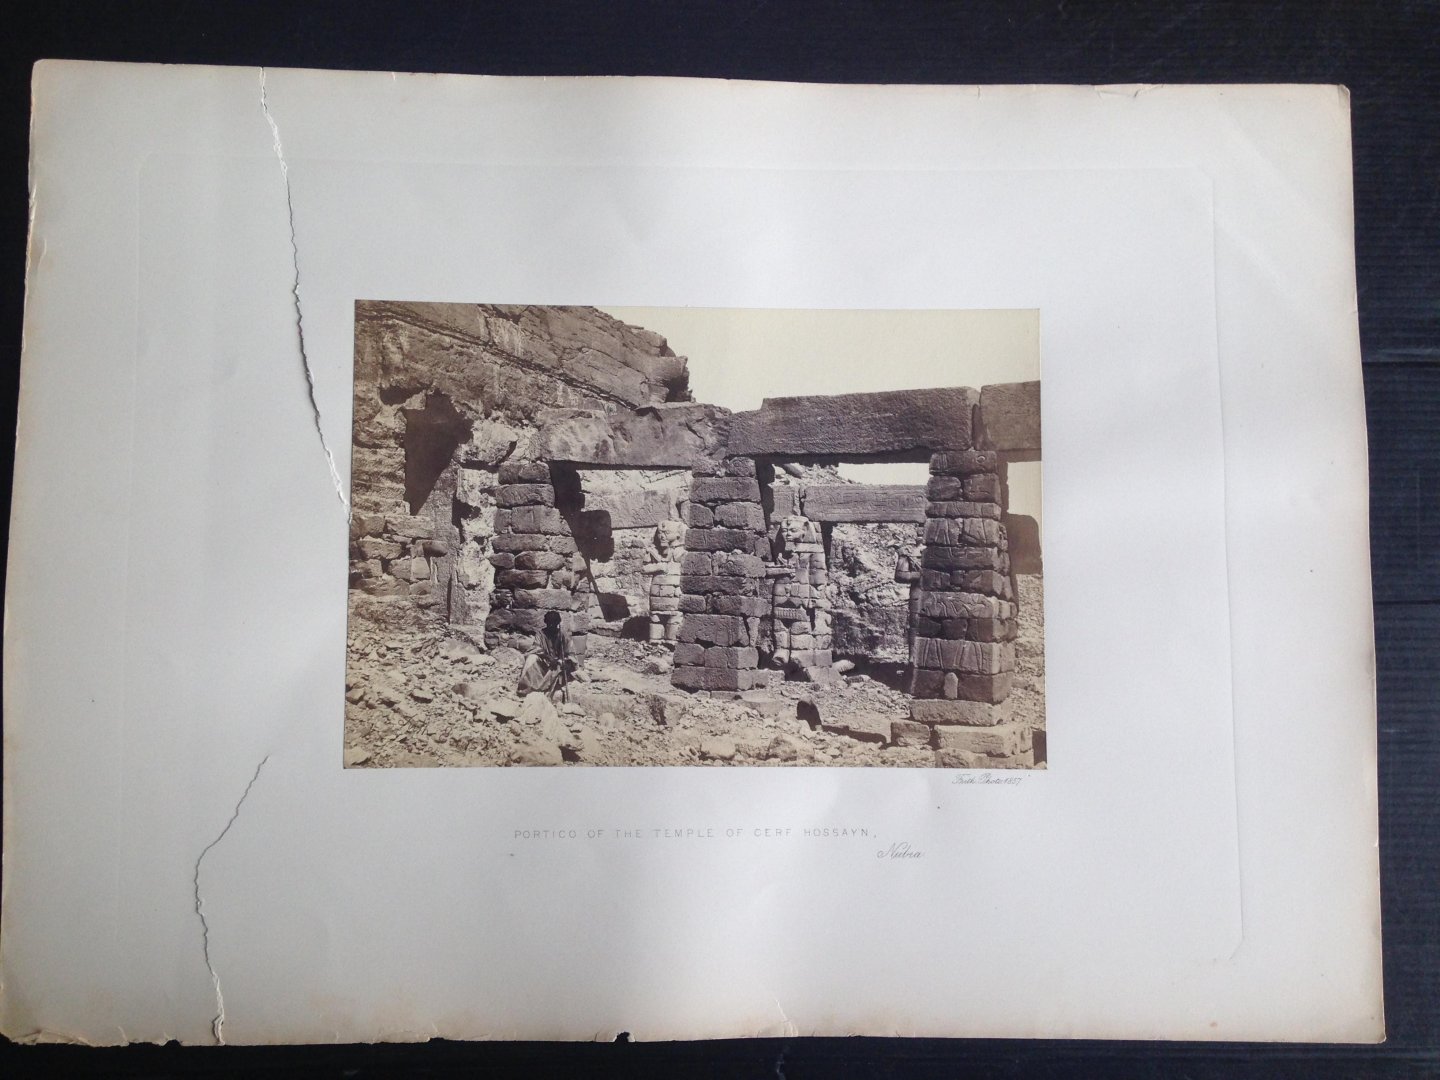 Frith, Francis - Portico of the Temple of Cerf Hossayn, Nubia, Series Egypt and Palestine